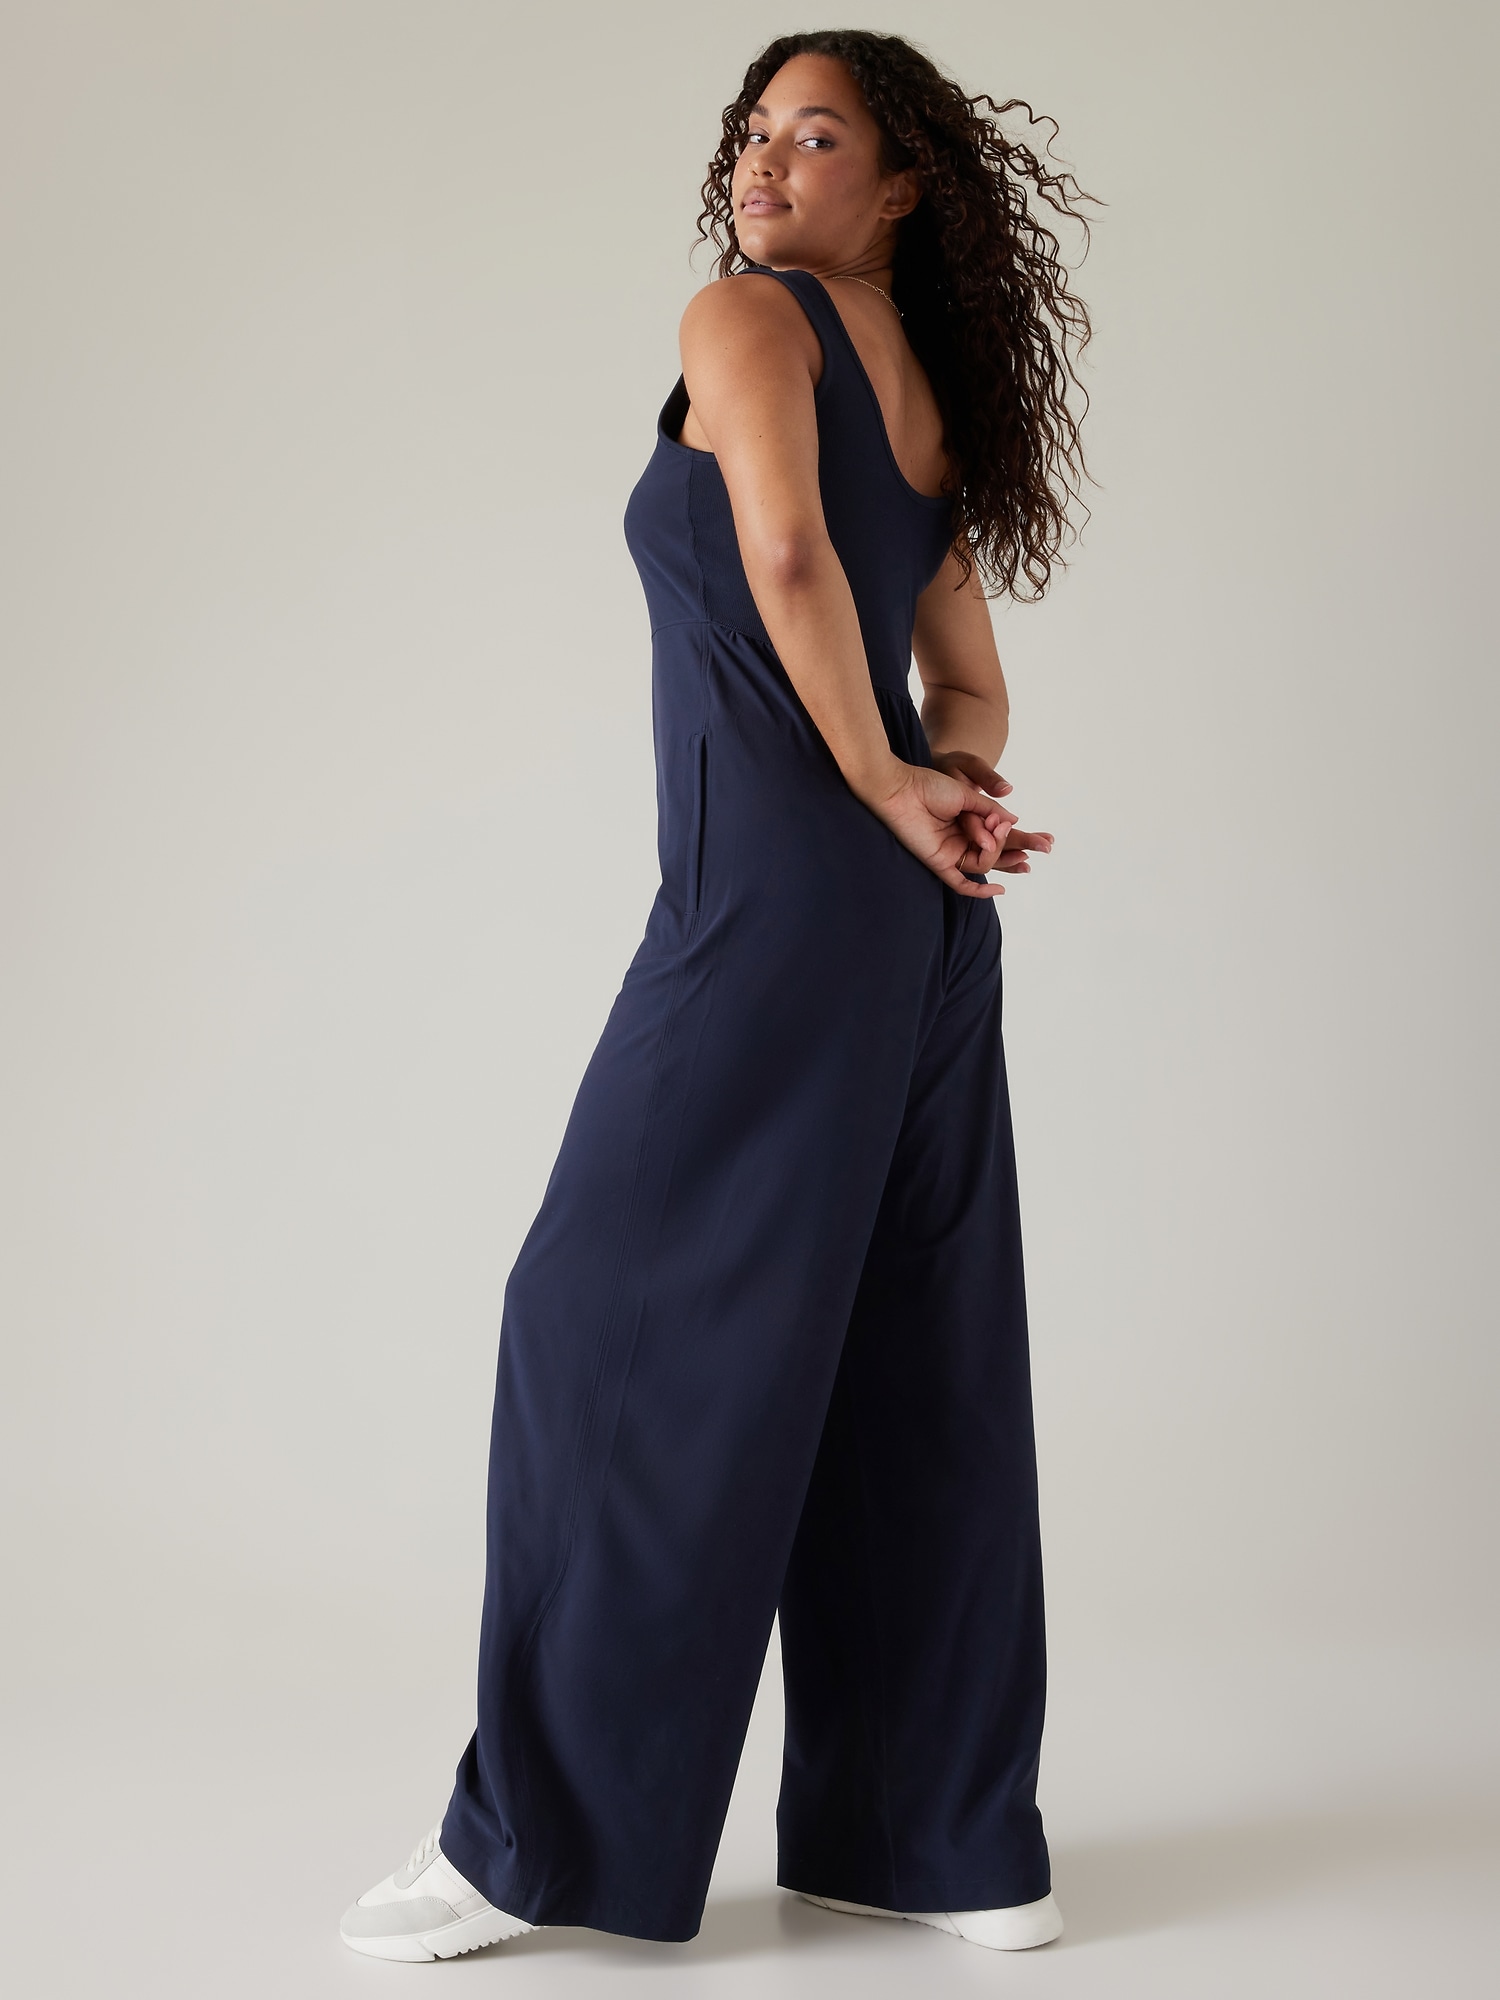 The Most Comfortable Dresses and Jumpsuits From Athleta